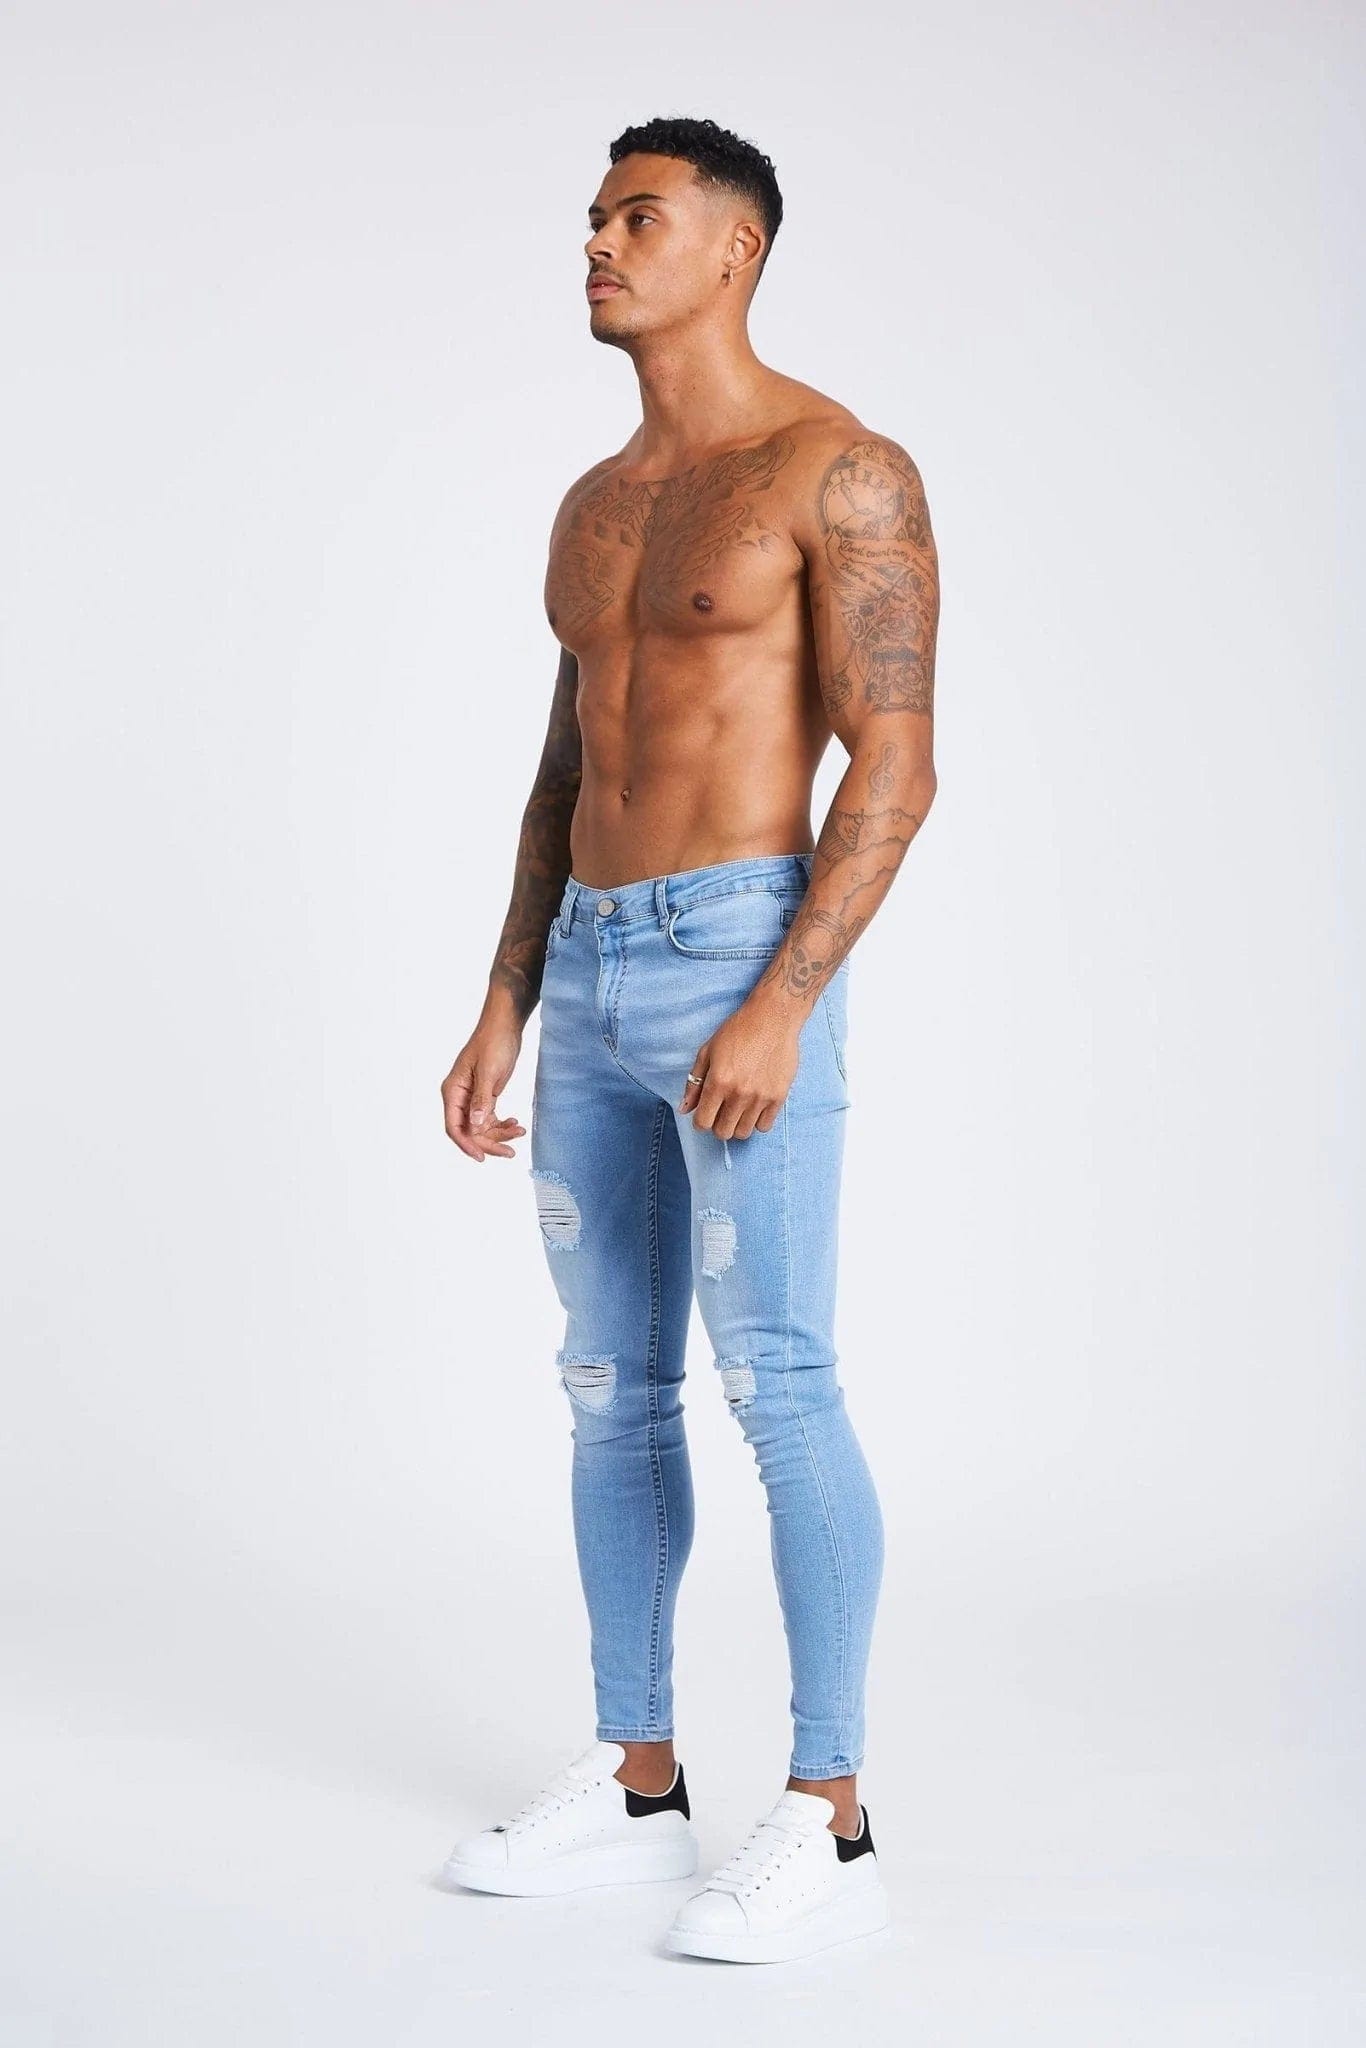 LIGHT BLUE JEANS RIPPED AND REPAIRED, 49% OFF